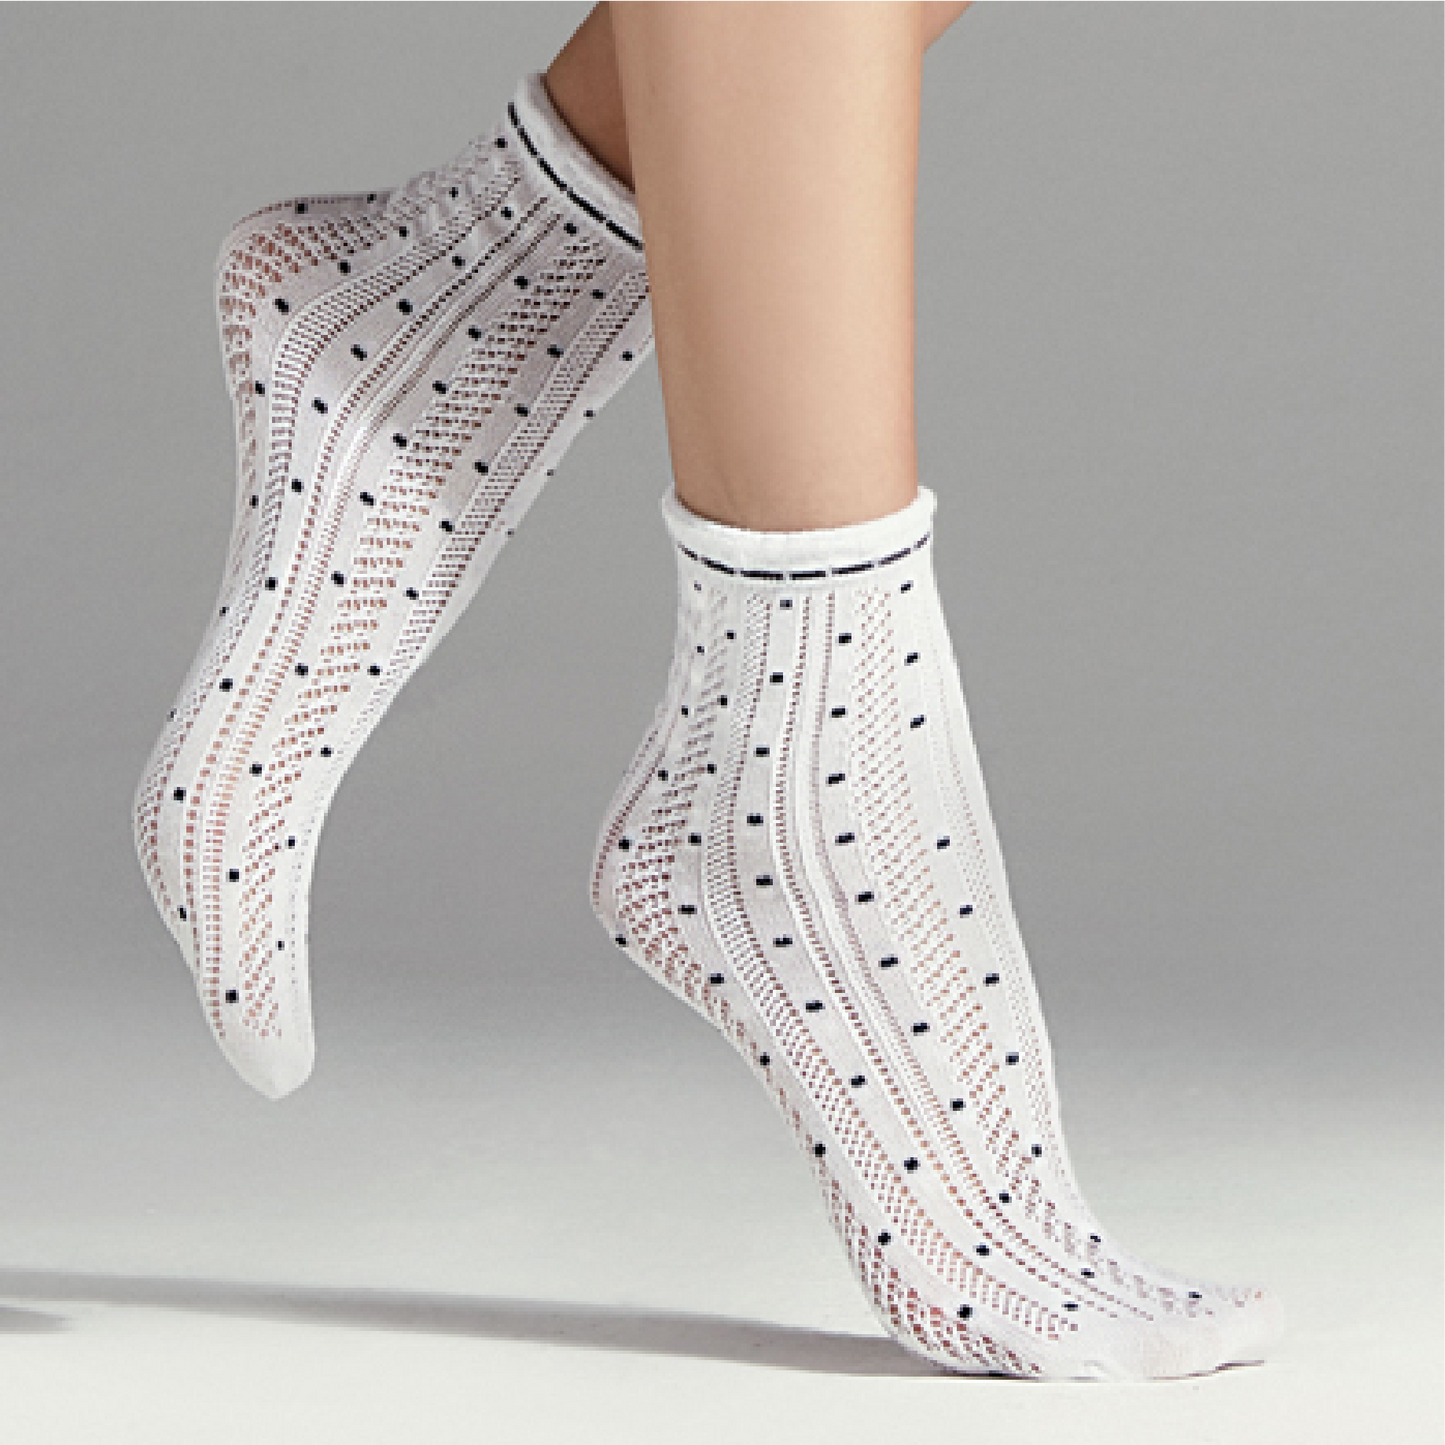 Omsa Needle Calzino - White light cotton mix ankle socks with openwork ribs, black spot pattern and picot cuff.